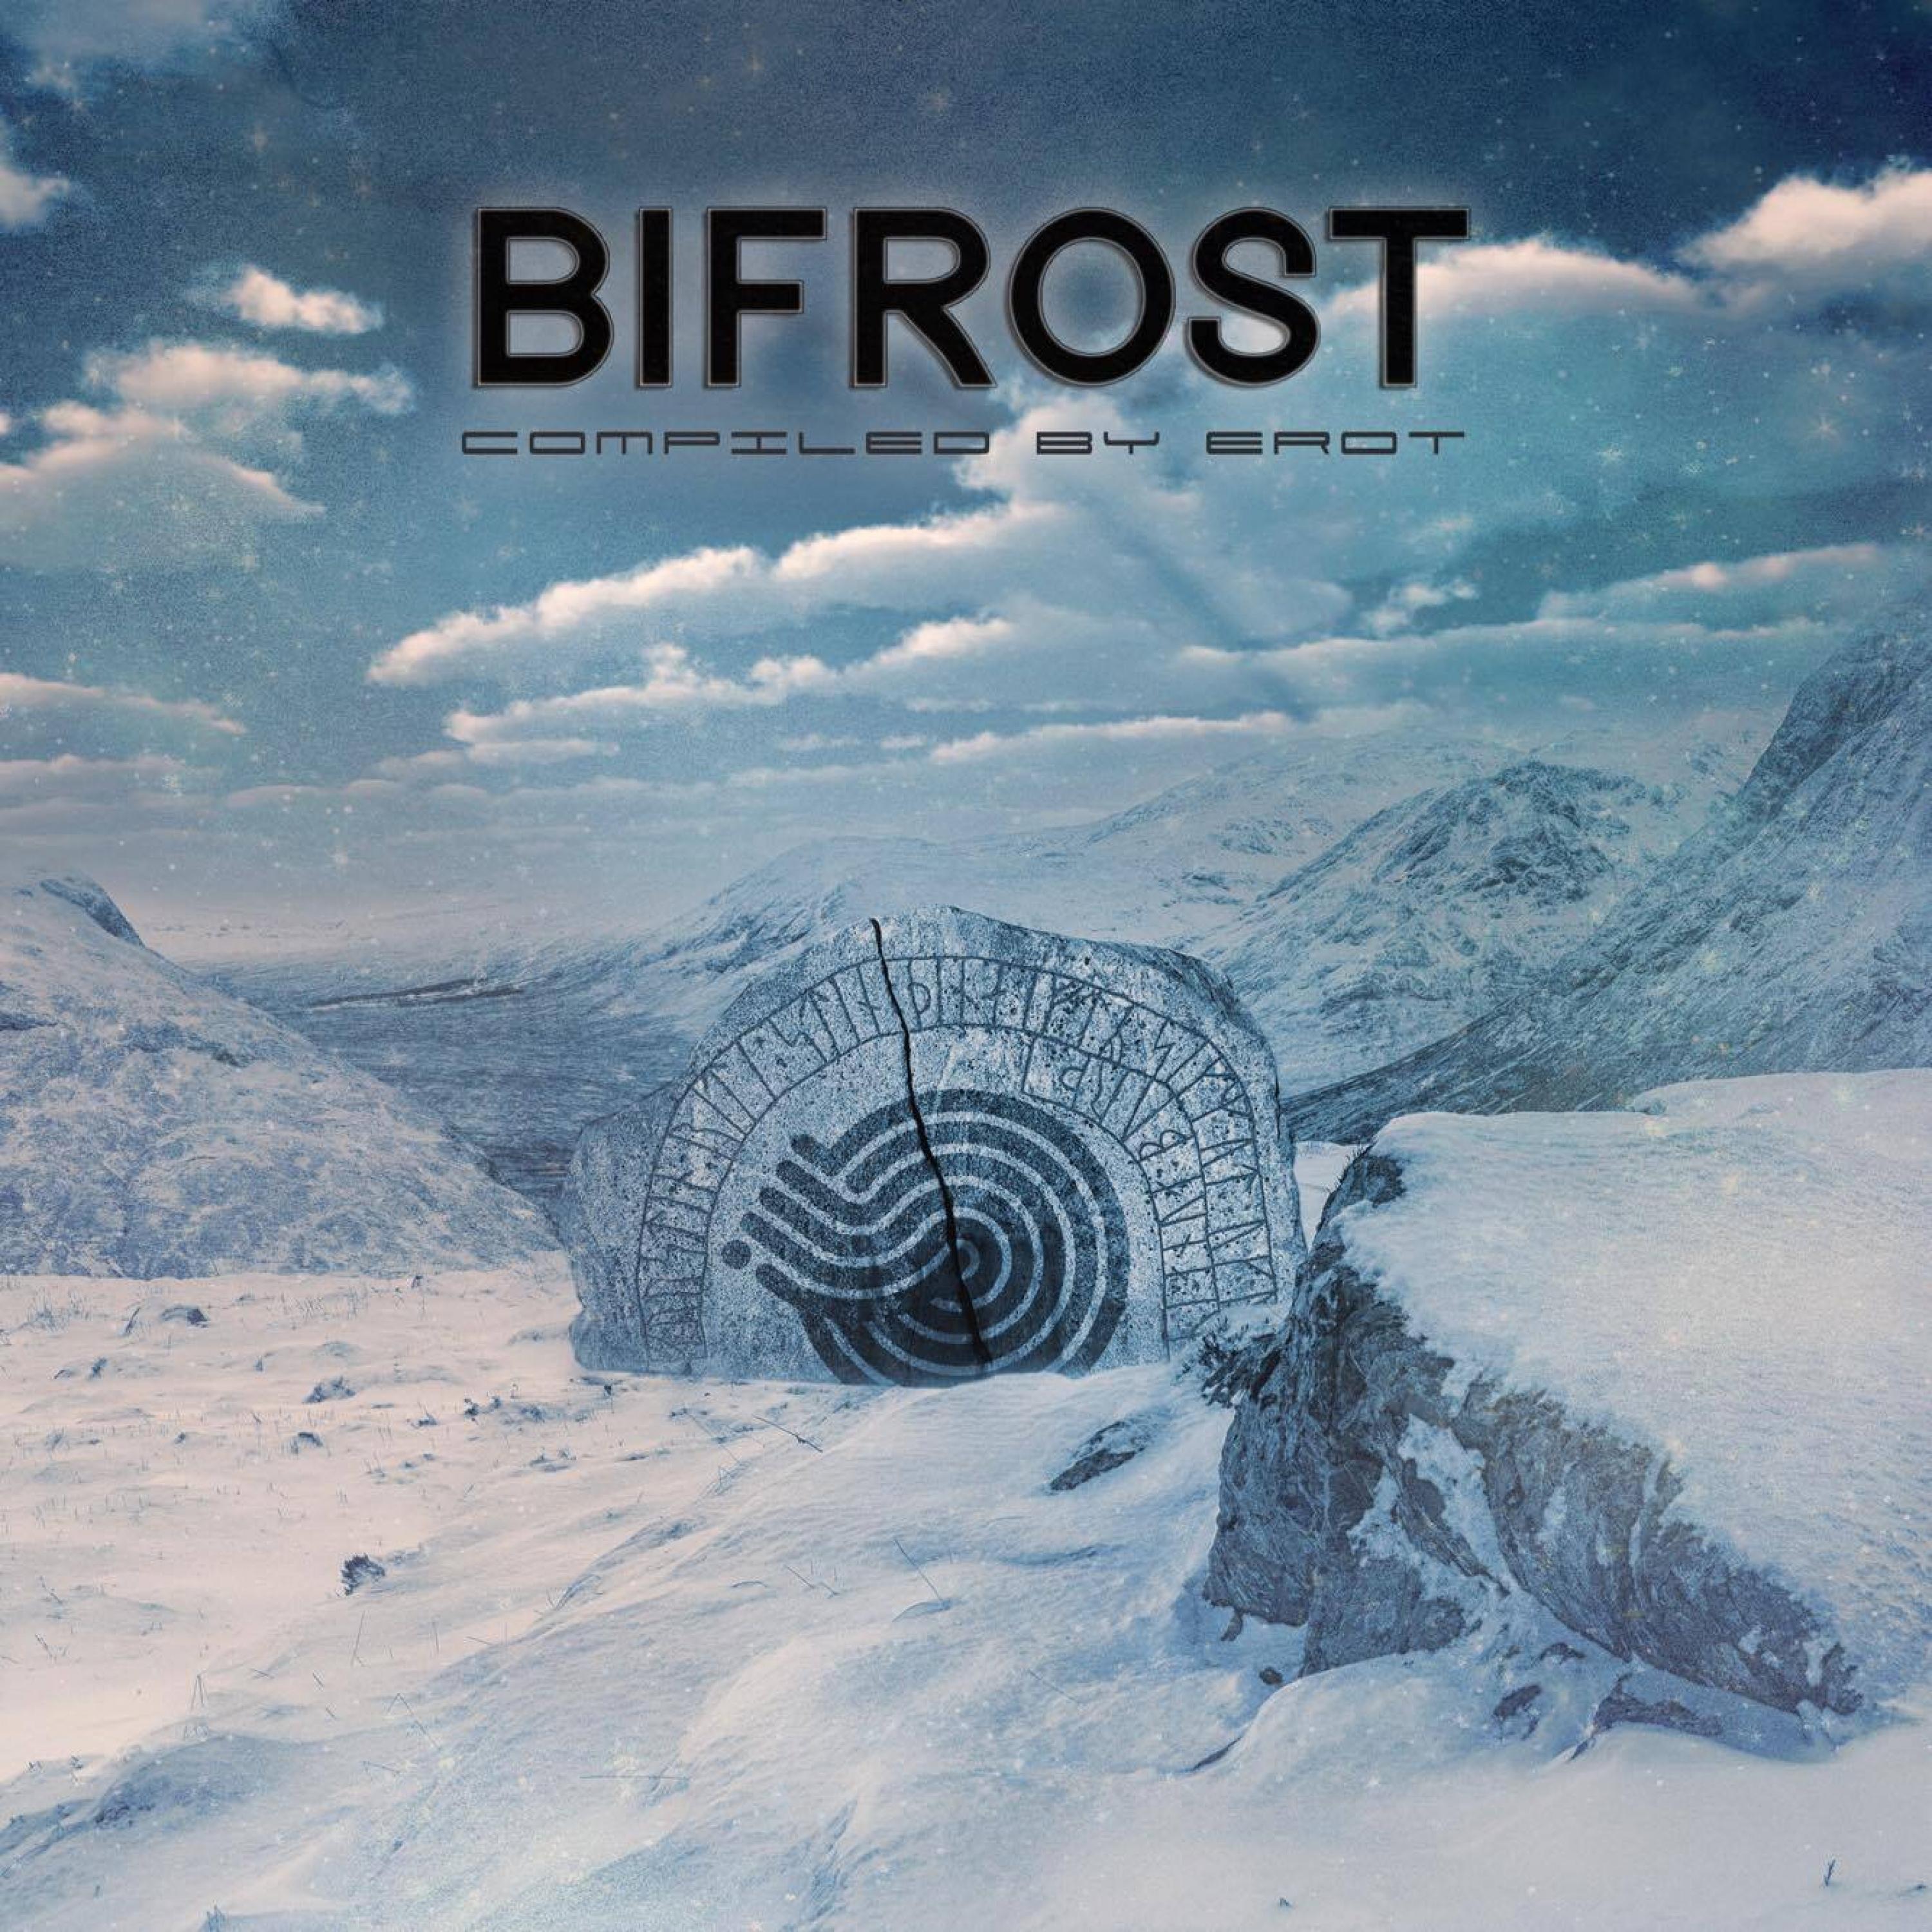 Bifrost (Compiled by Erot)